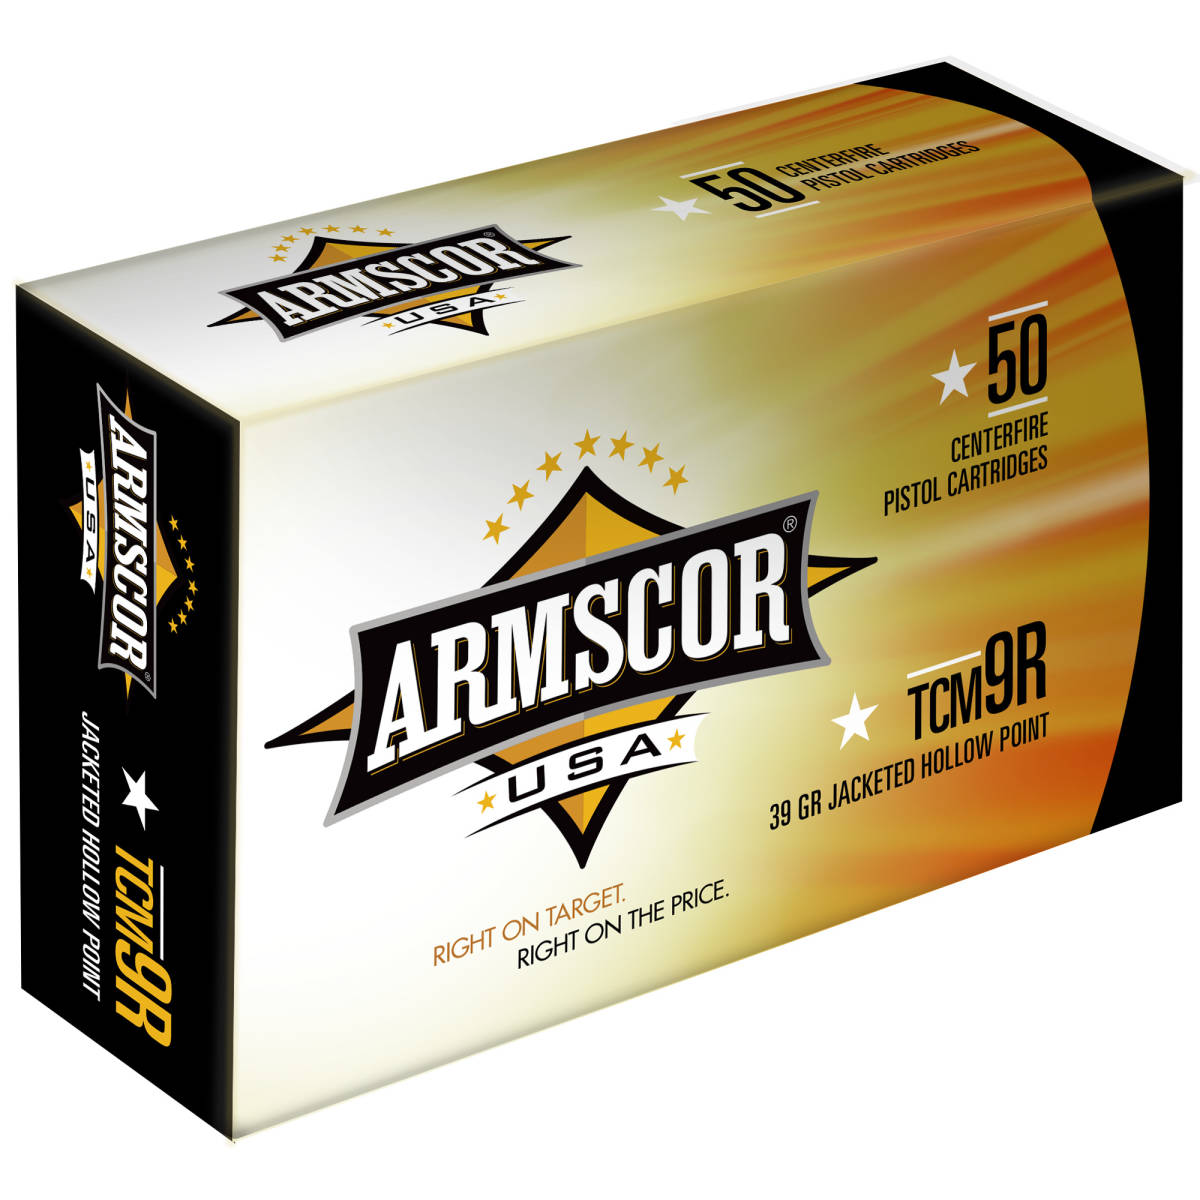 Armscor FAC22TCMNR1N USA 22 TCM 9R 39 gr 2000 fps Jacketed Hollow Point...